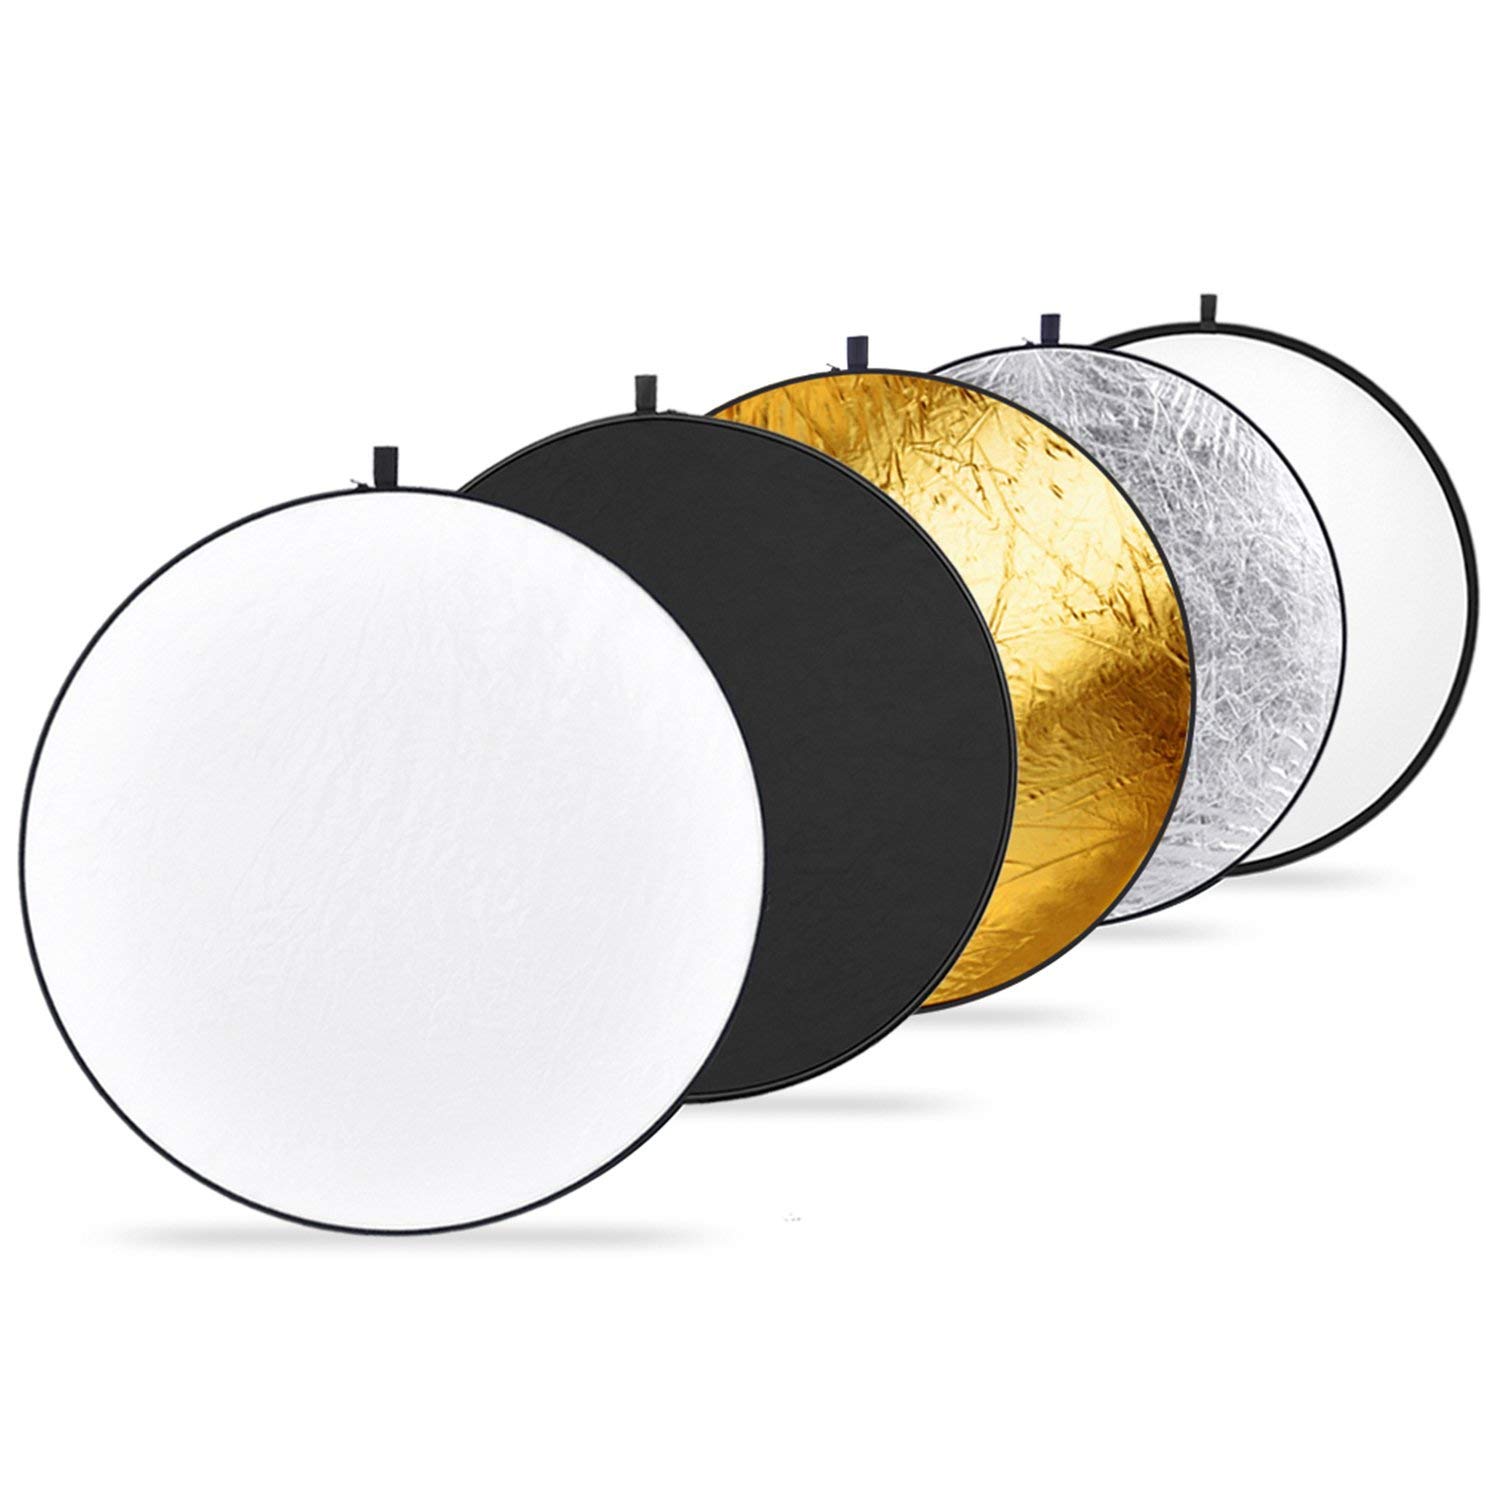 110cm-5-in-1-Collapsible-Multi-Disc-Light-Reflector-with-Bag